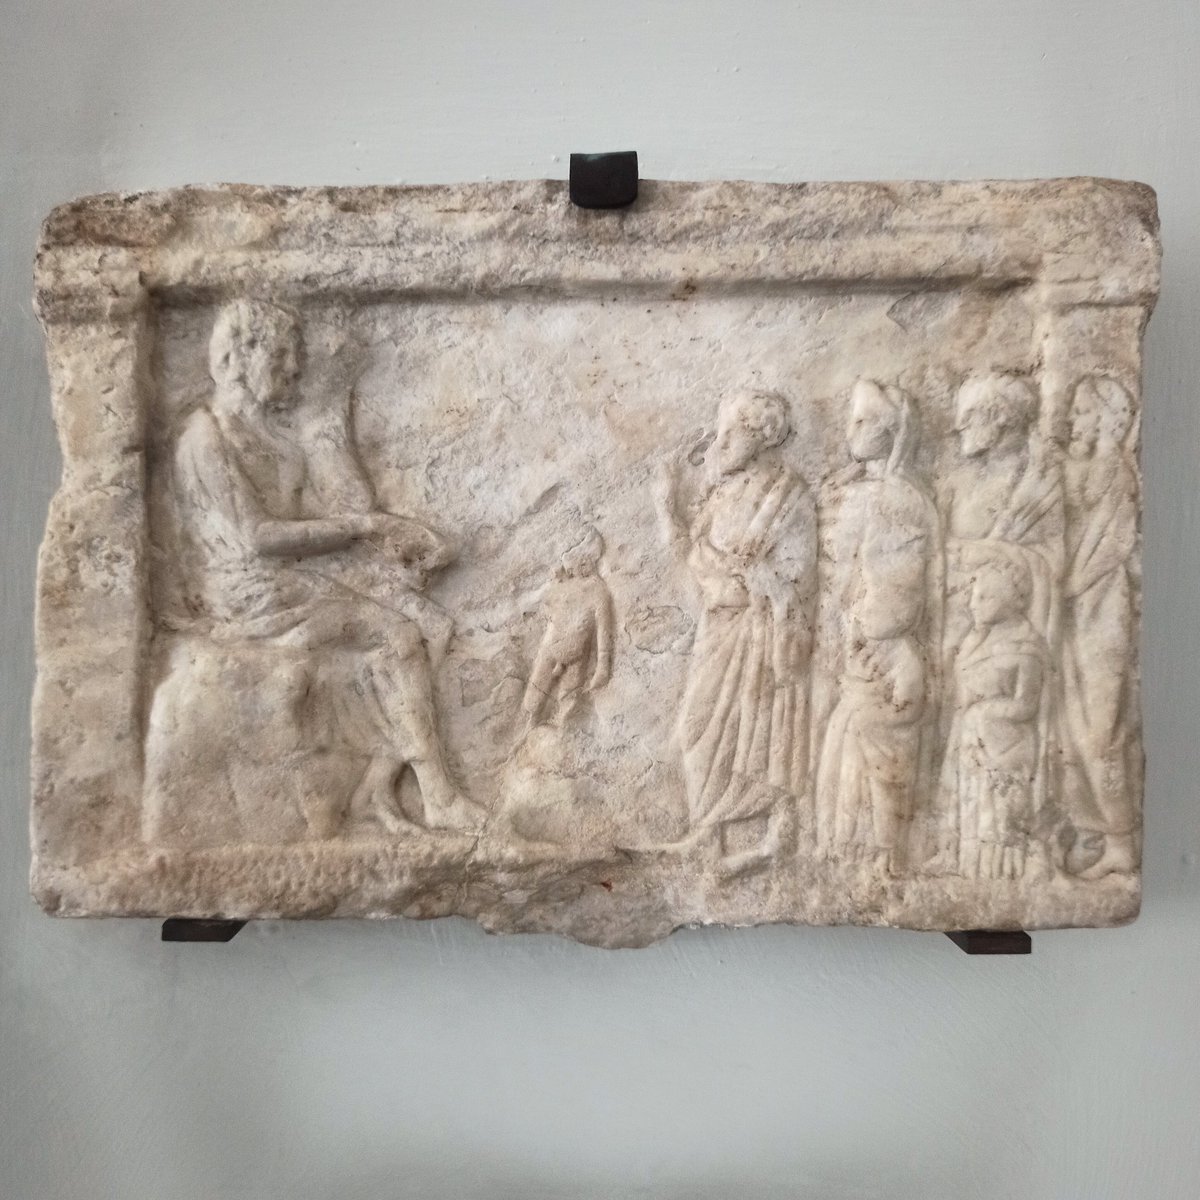 #ReliefWednesday Votive offering to the Agathodaimon (Good Genius), Greek work of the first half of the 4th century BC, Teodoro Correr collection, on display in room 17 #museum #Venice #Archaeology